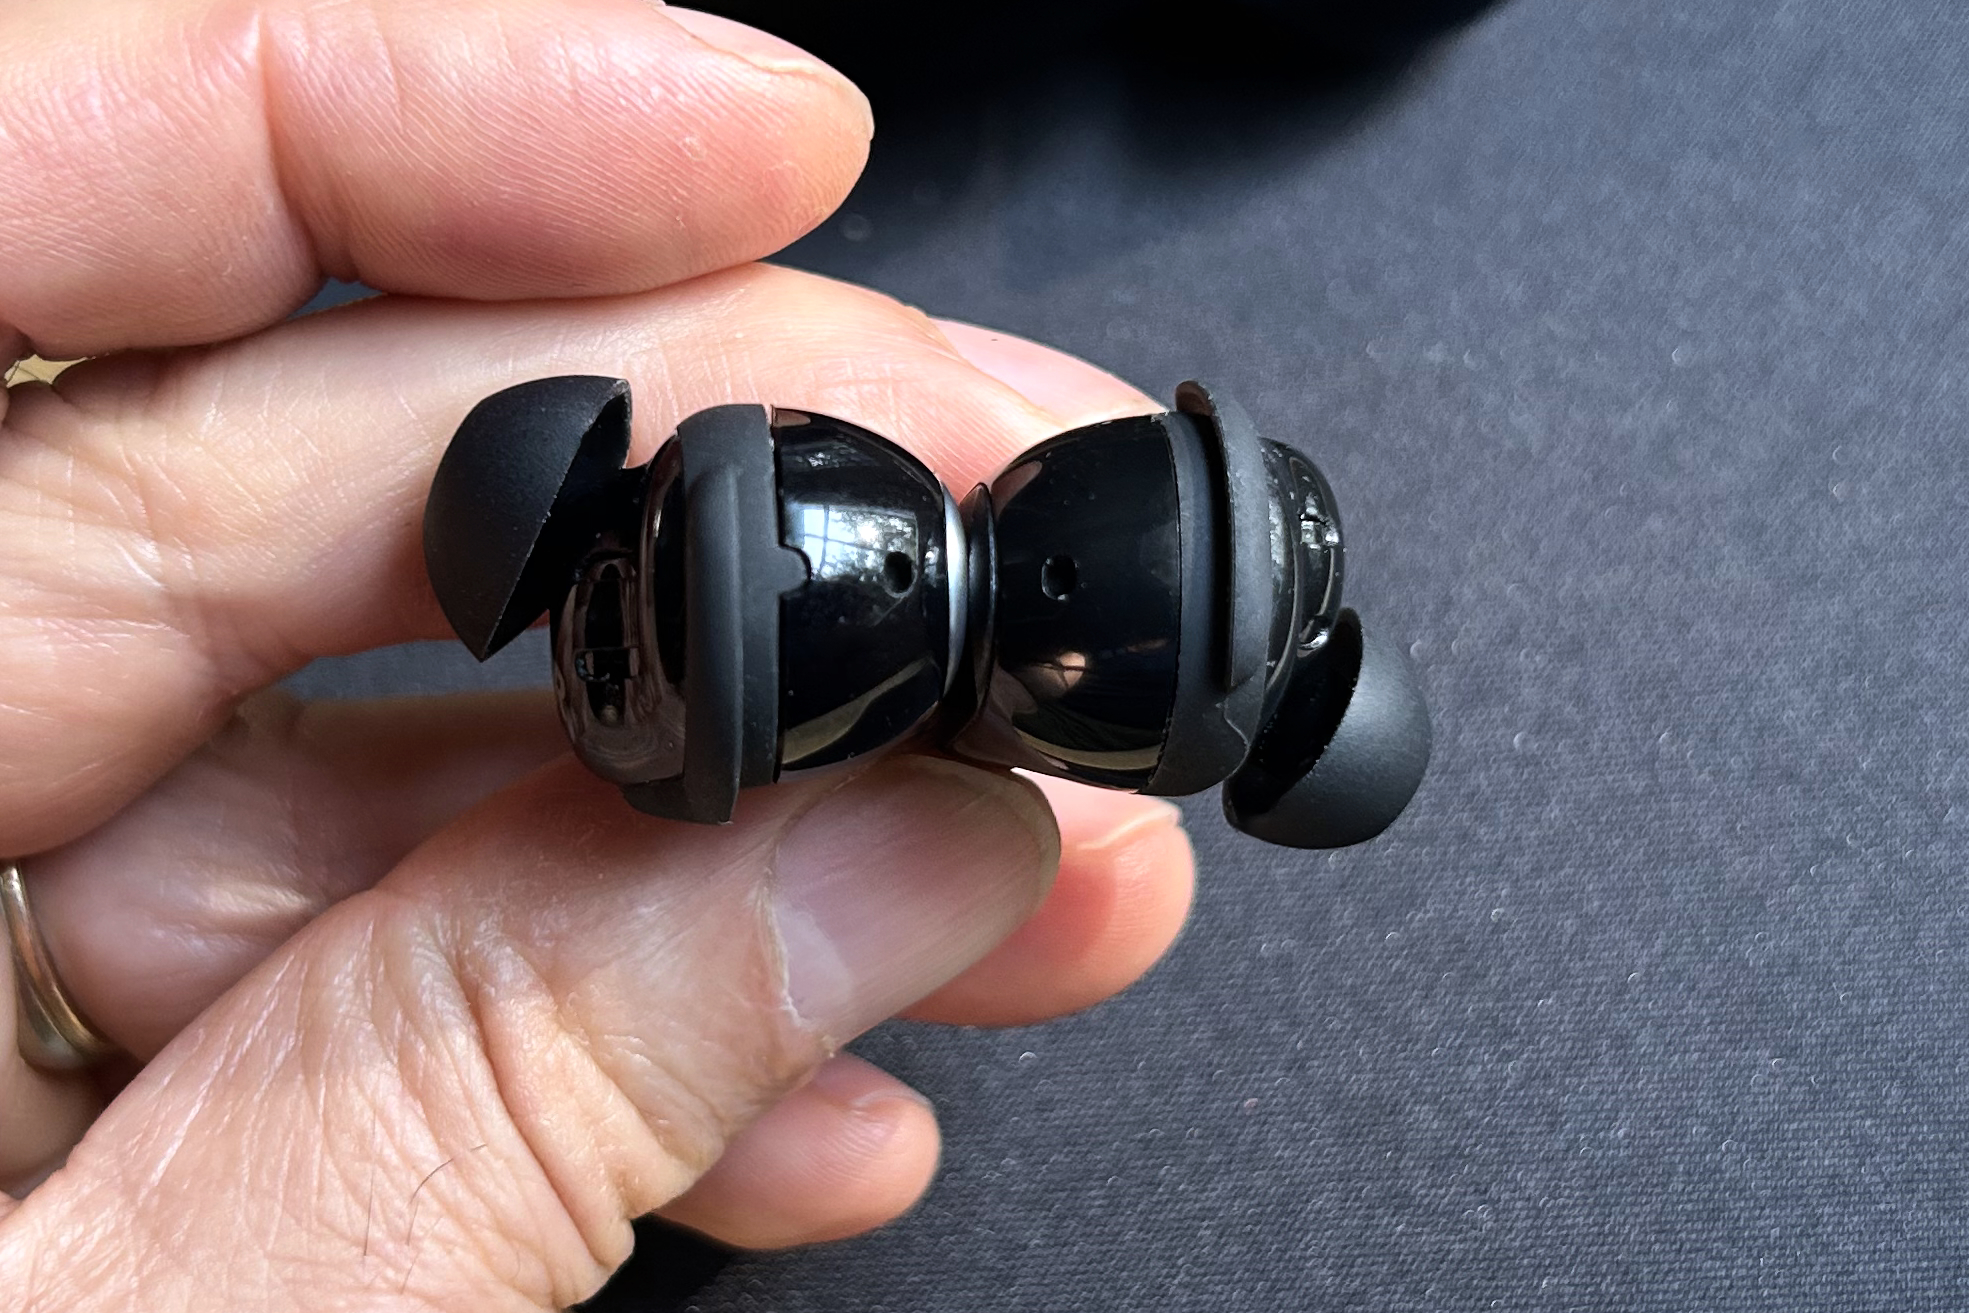 Bose QuietComfort Ultra Earbuds review